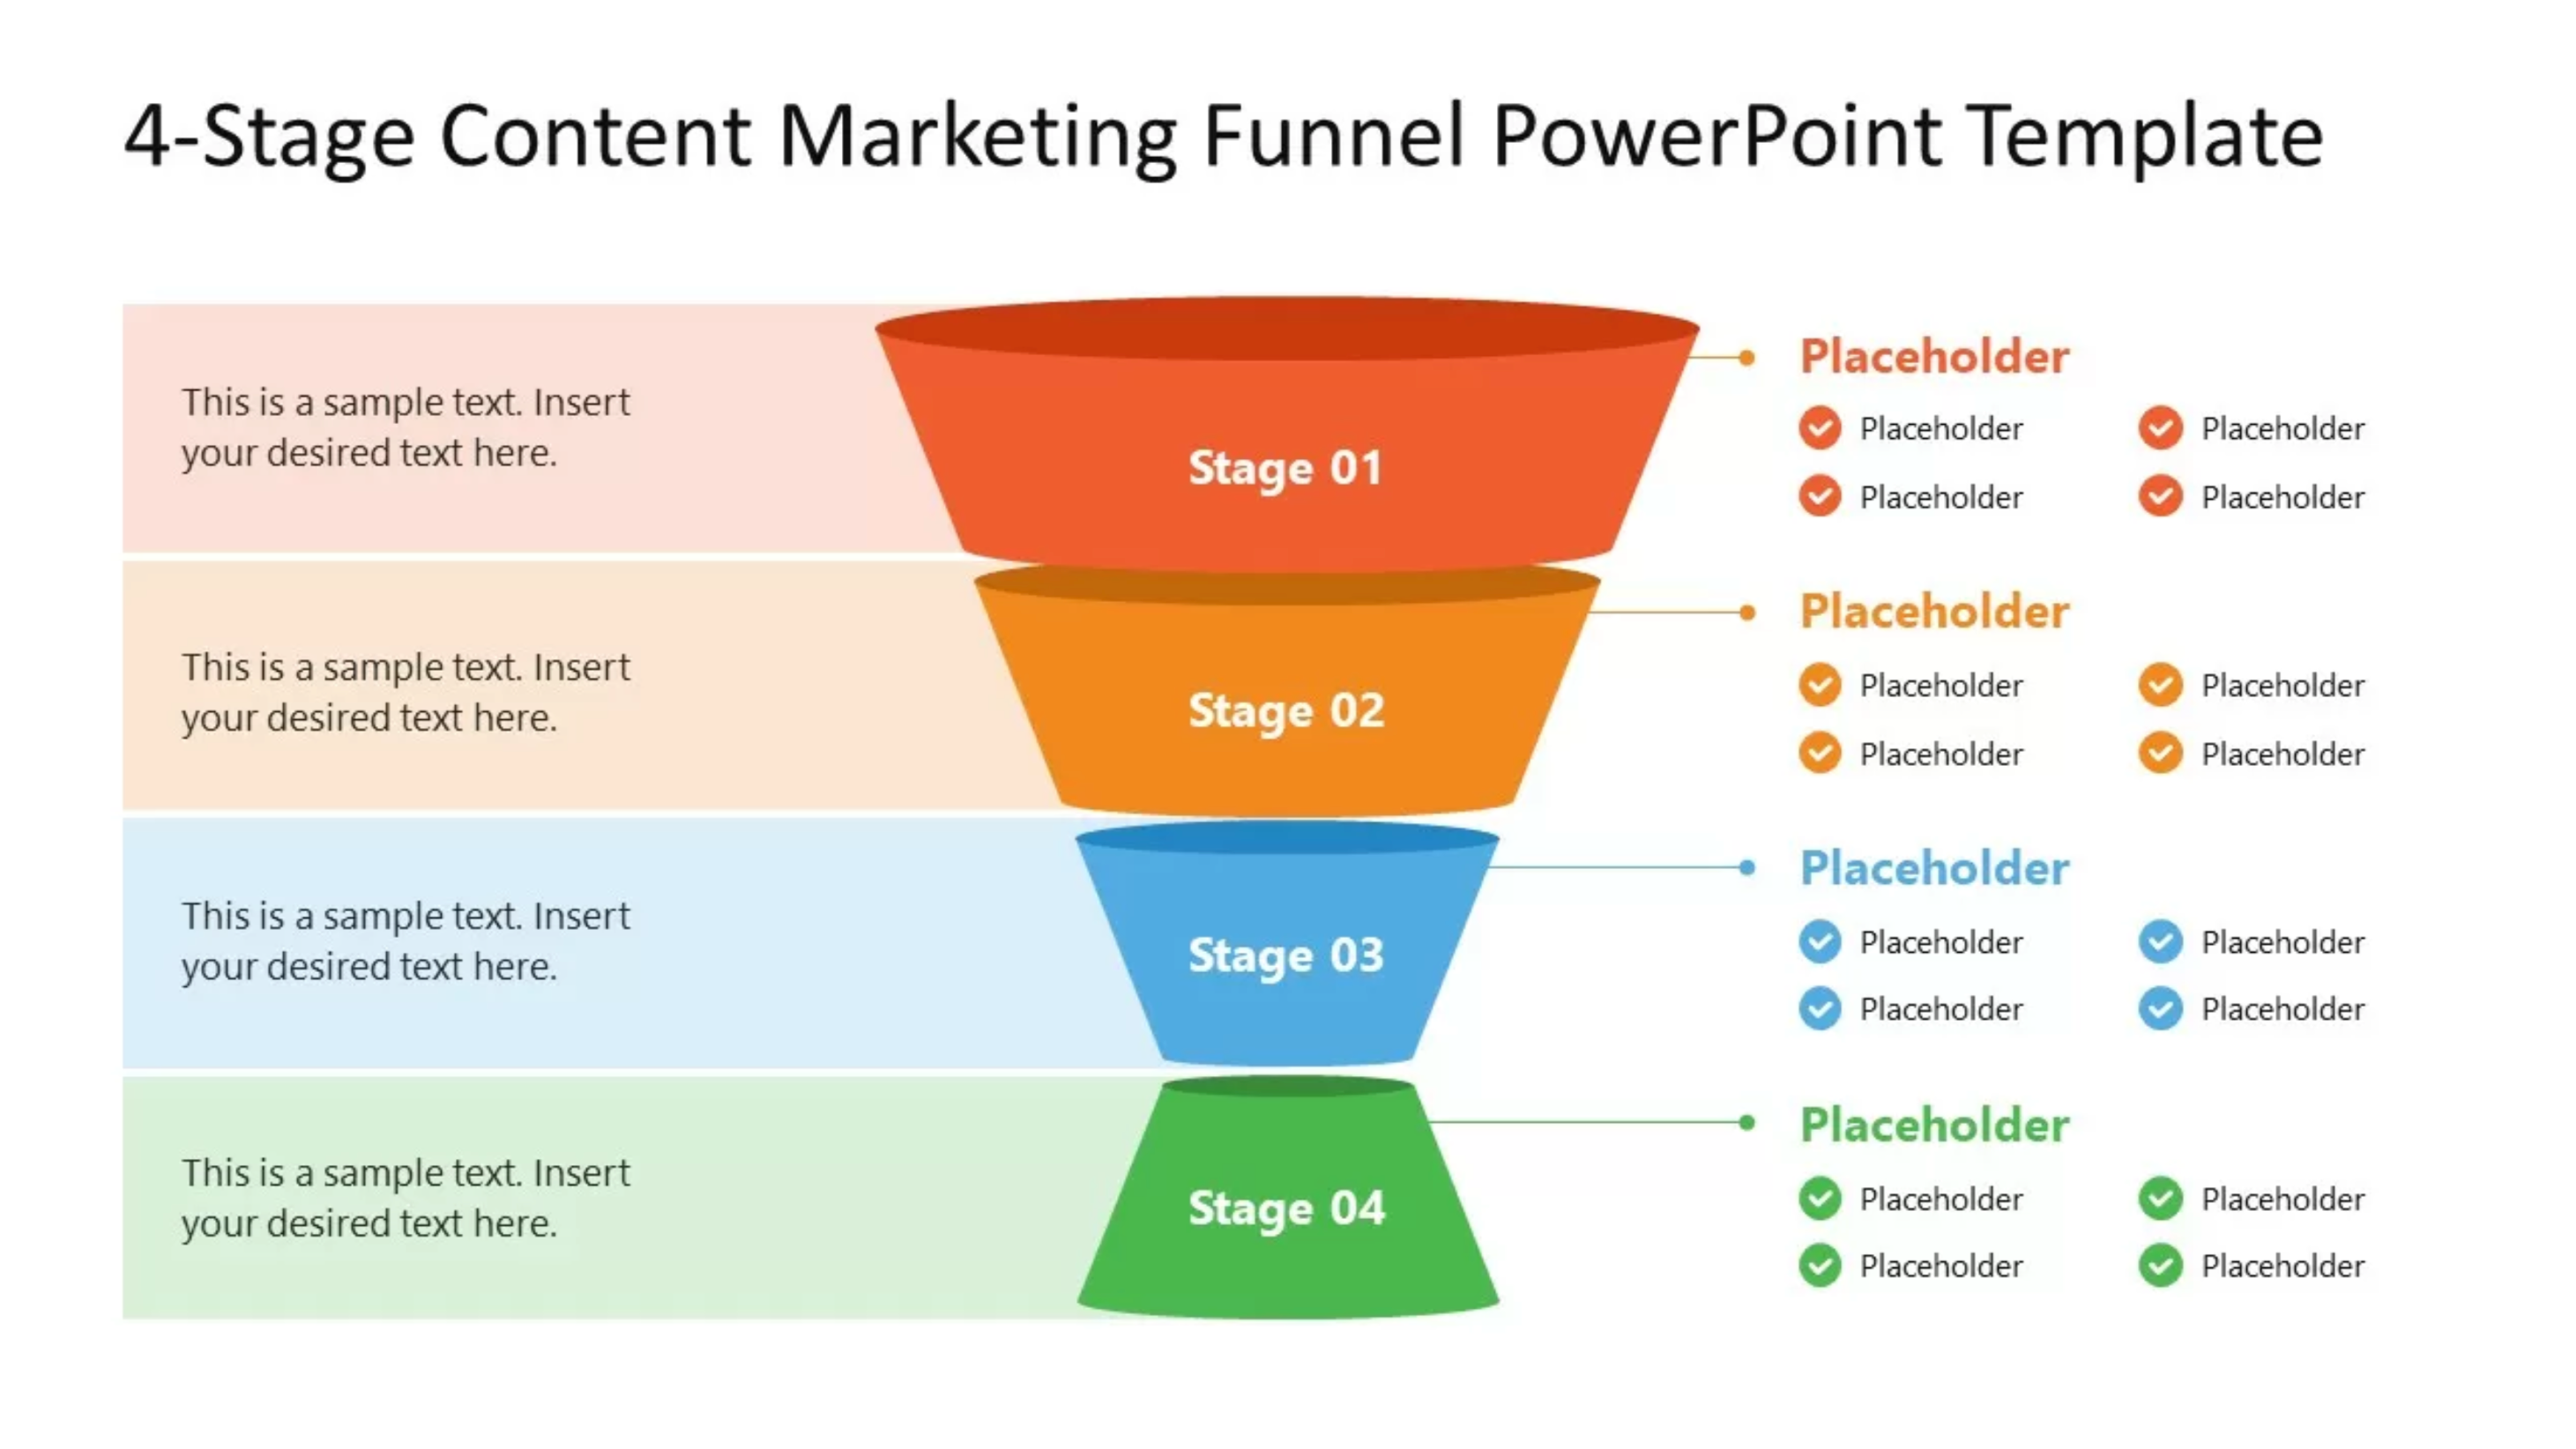 4-Stage Content Marketing Funnel PowerPoint Template